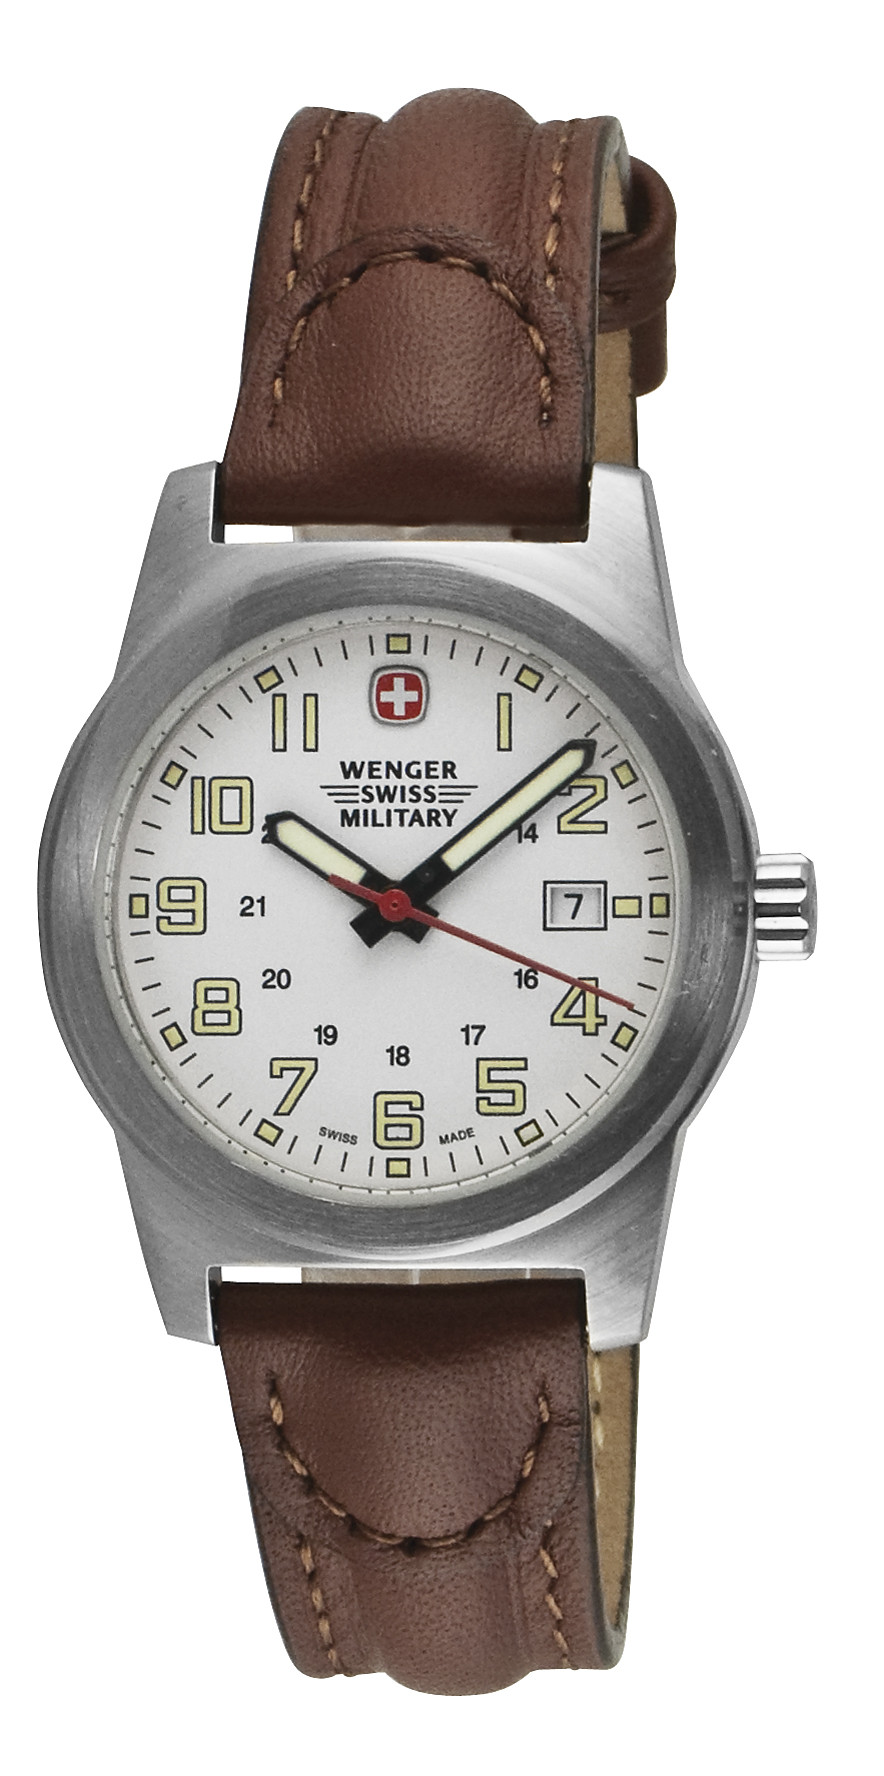 Swiss Army Wenger Watch - Army Military